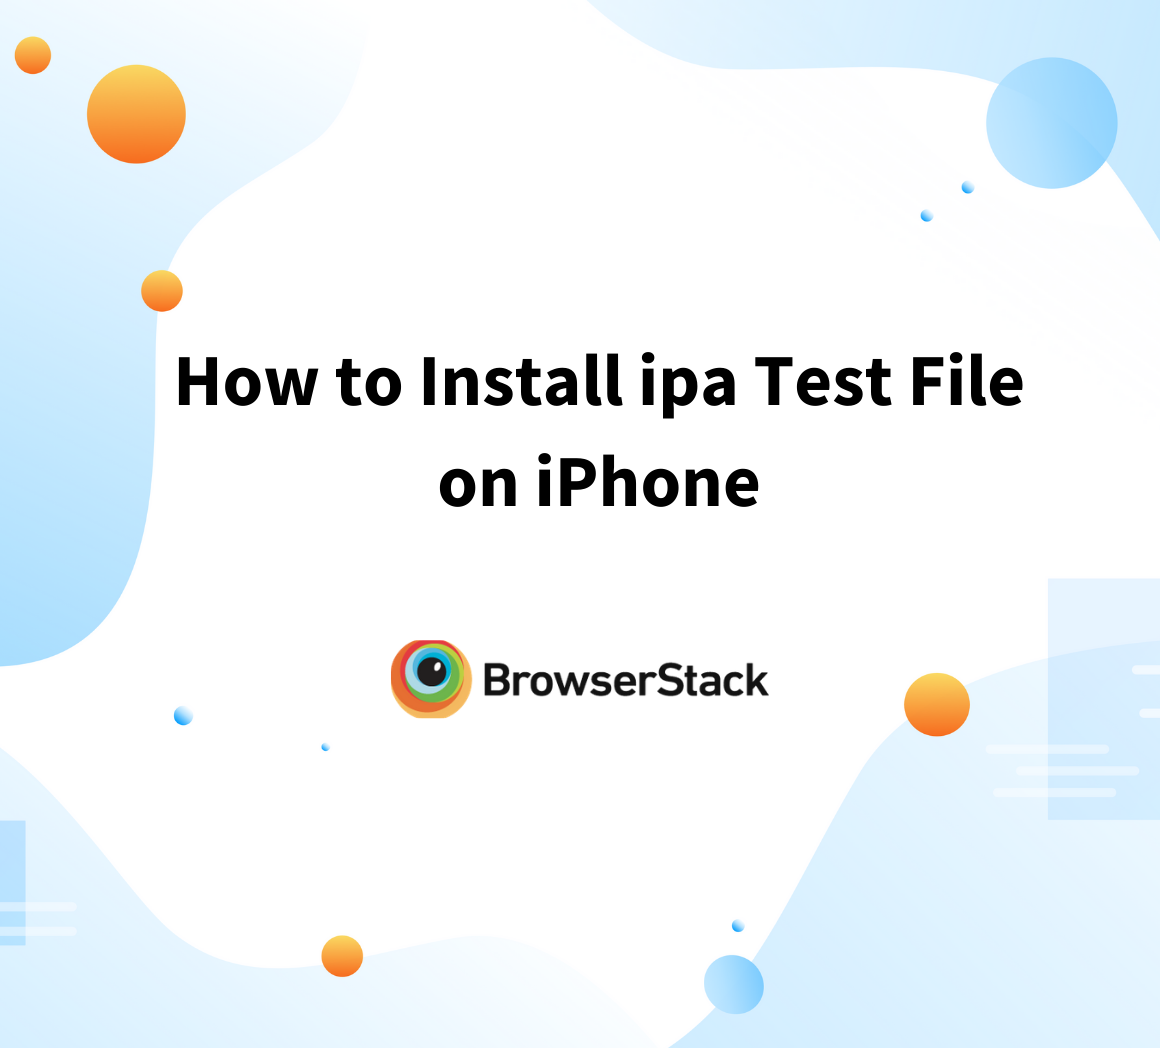 How to install ipa test file on iPhone